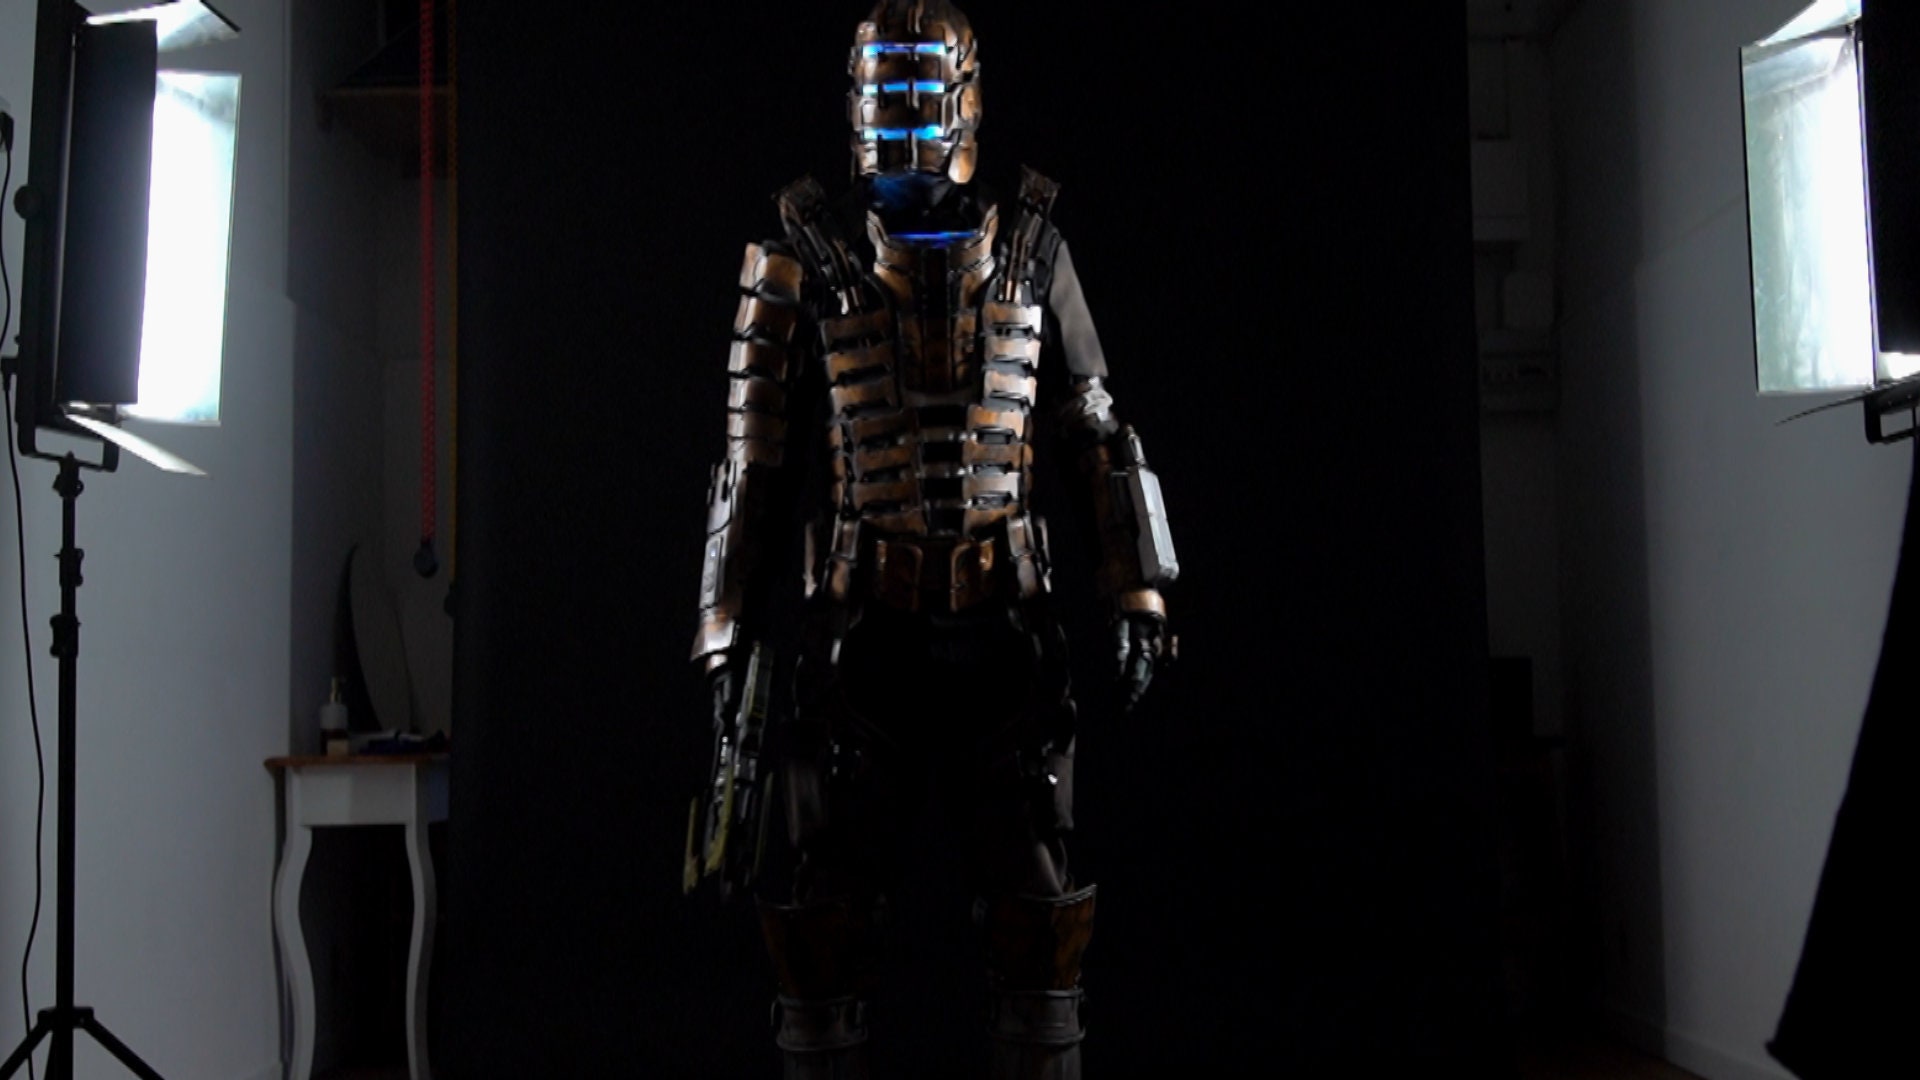 Dead Space Remake's Isaac Clarke gets classic Dead Space 2 makeover